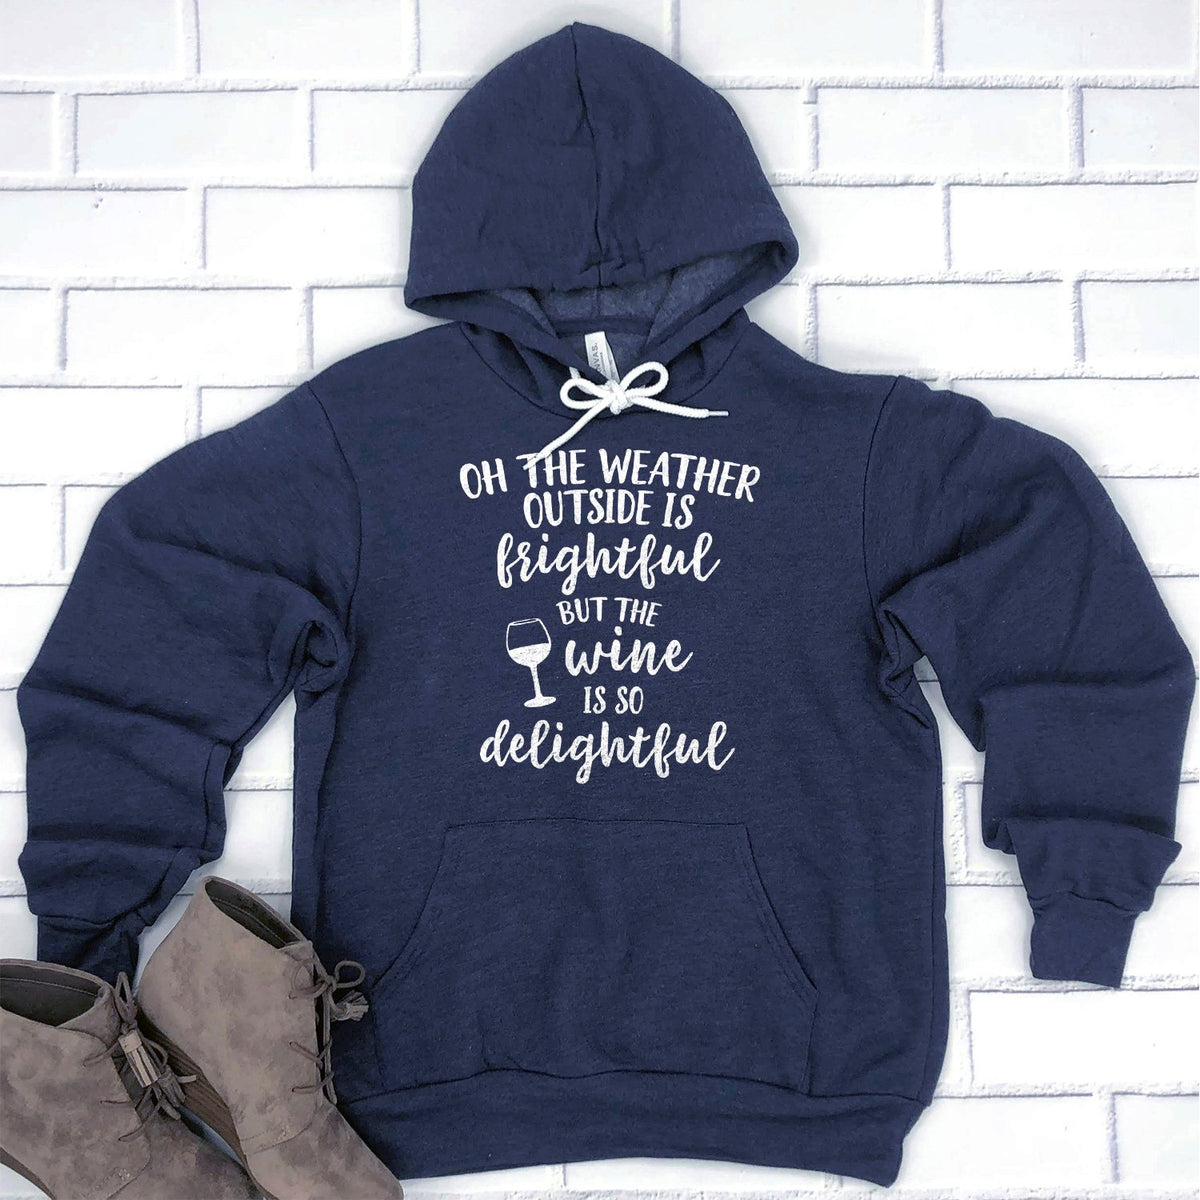 Oh The Weather Outside is Frightful But The Wine is So Delightful - Hoodie Sweatshirt